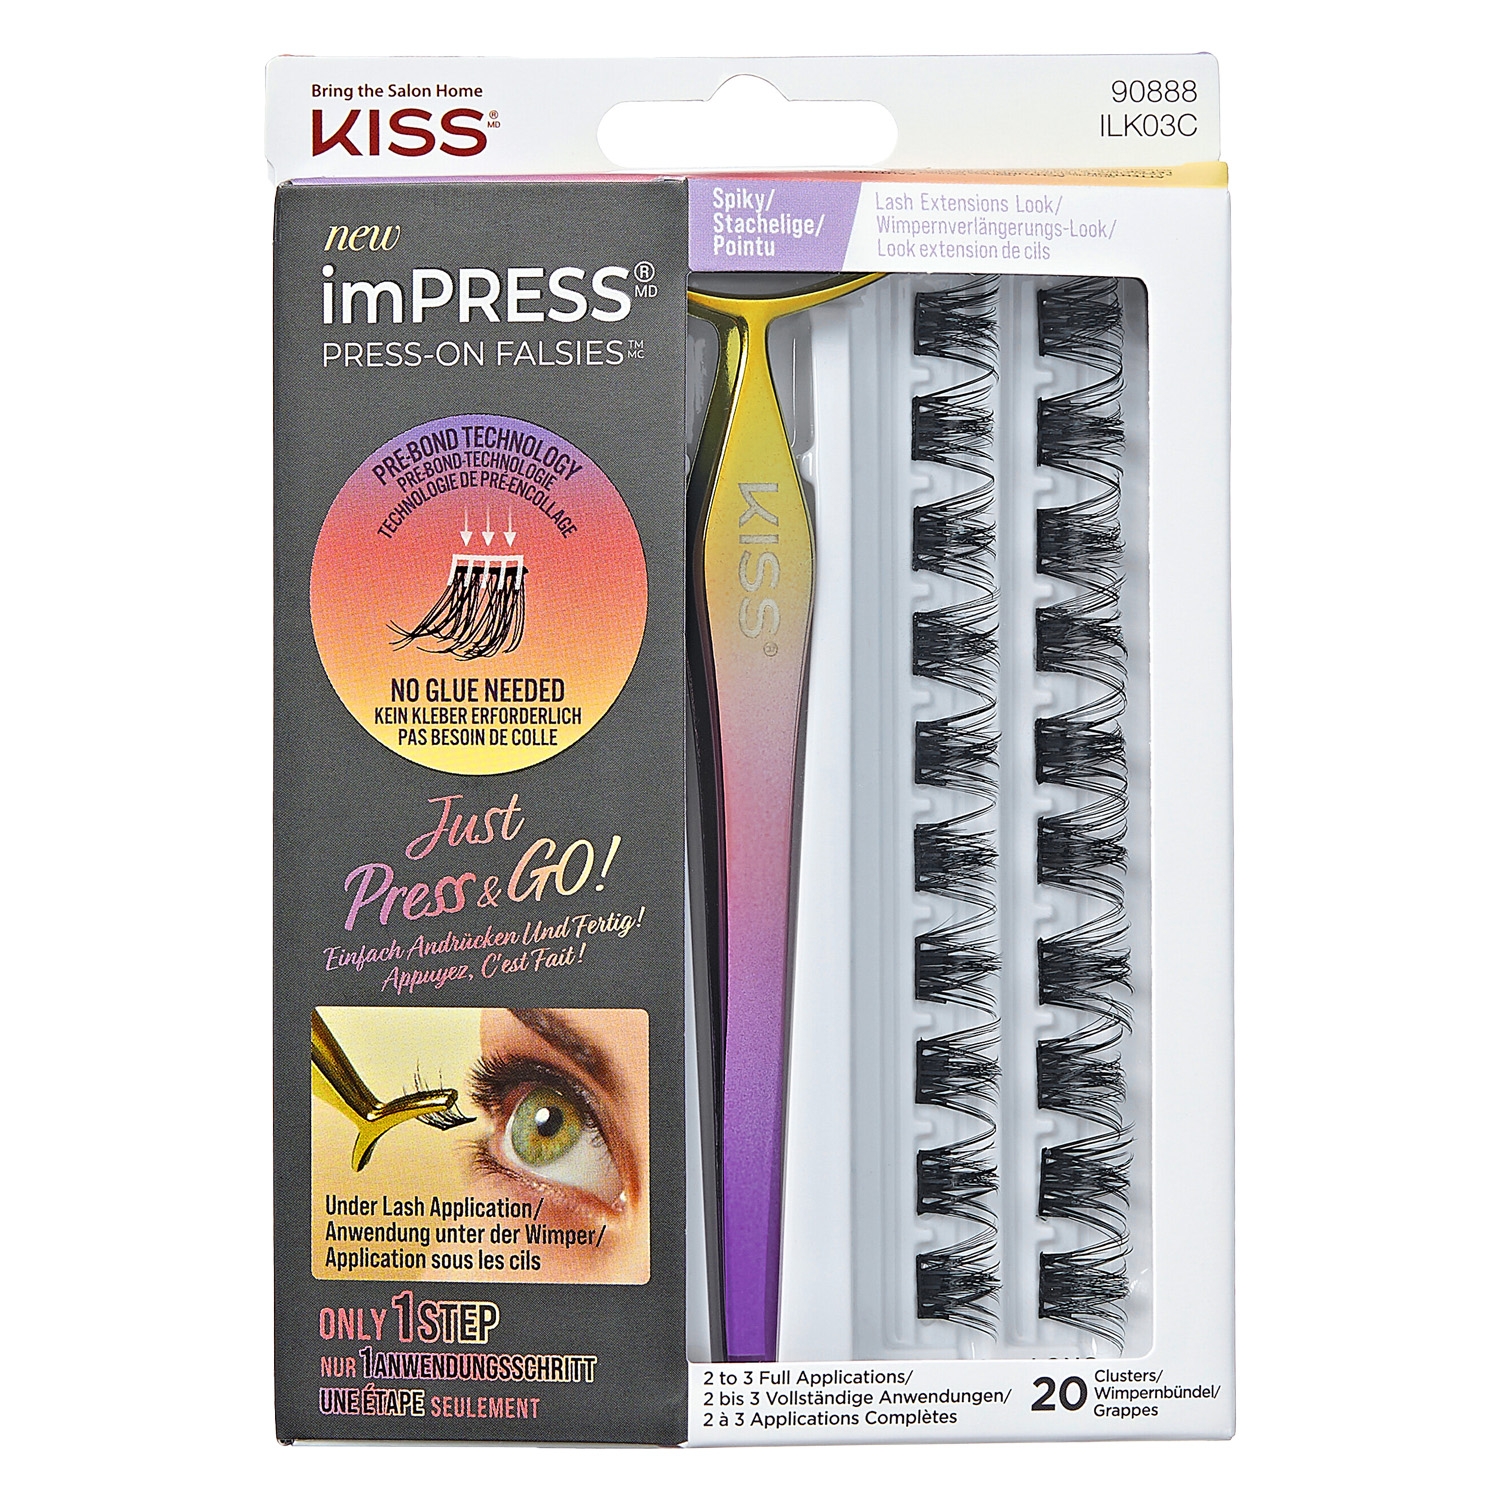 Product image from KISS Lashes - imPress Falsies Press-On Lash Kit Spiky